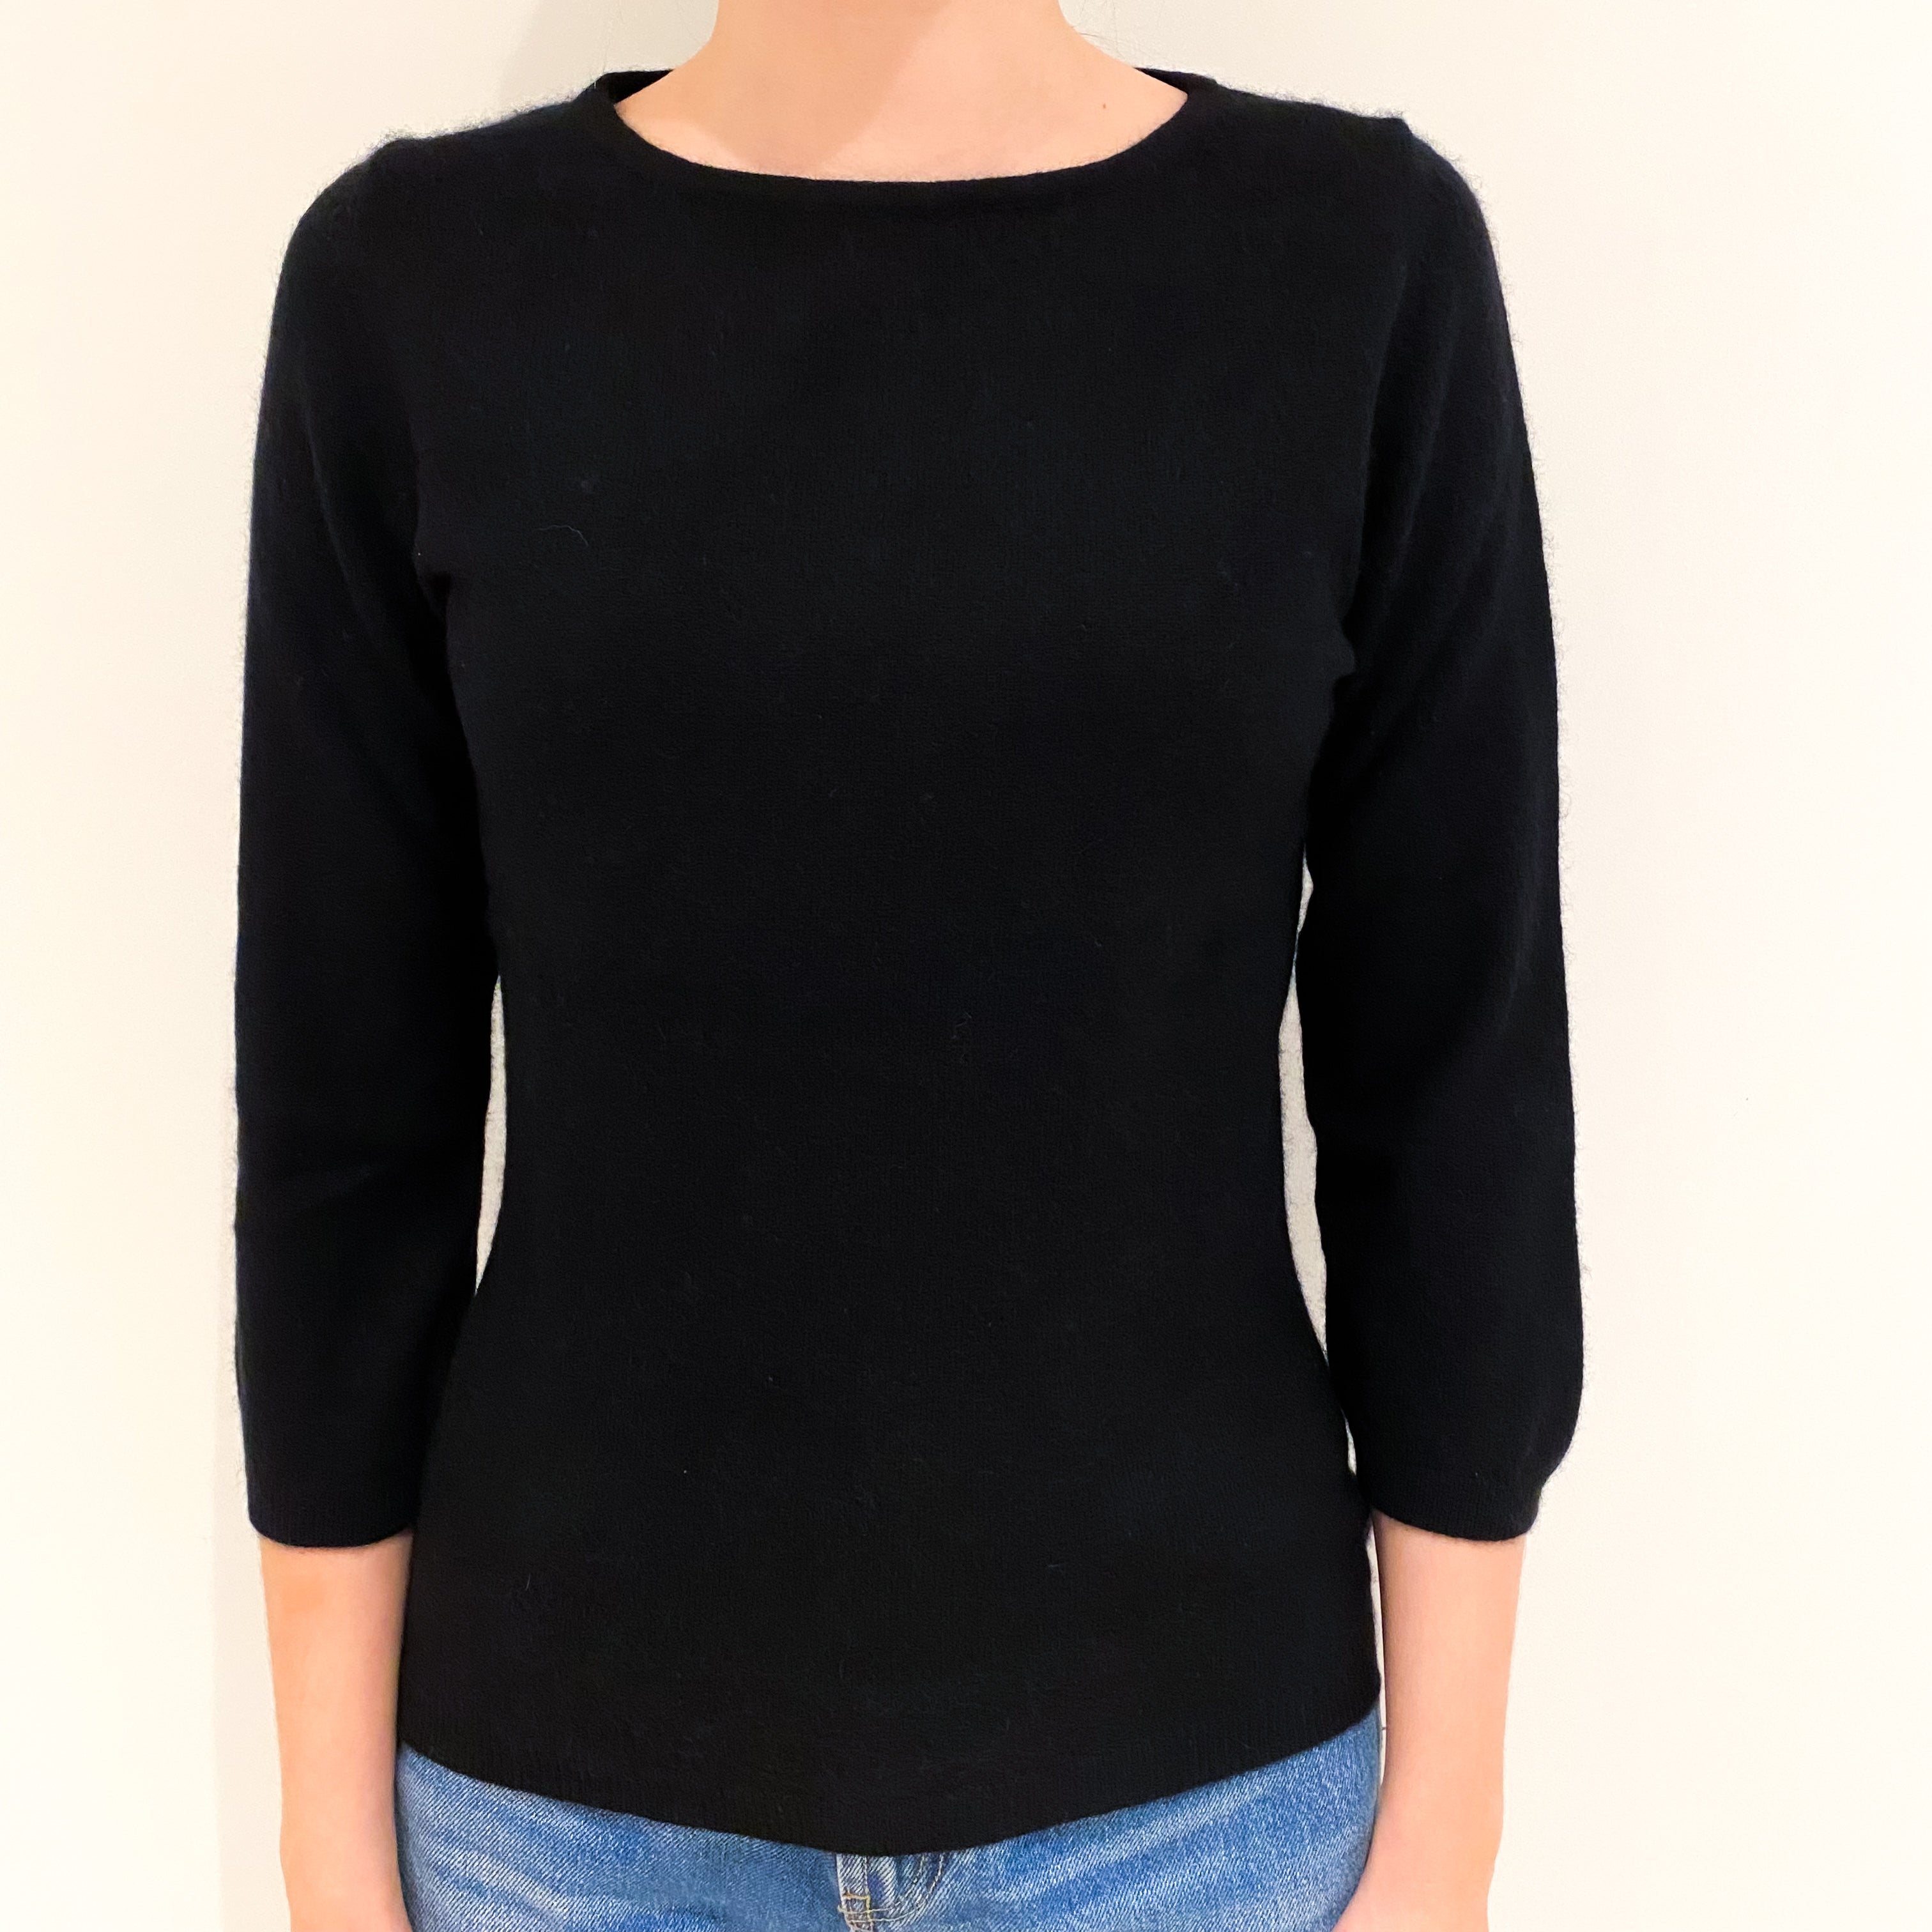 Black 3/4 Sleeved Cashmere Crew Neck Jumper Extra Small